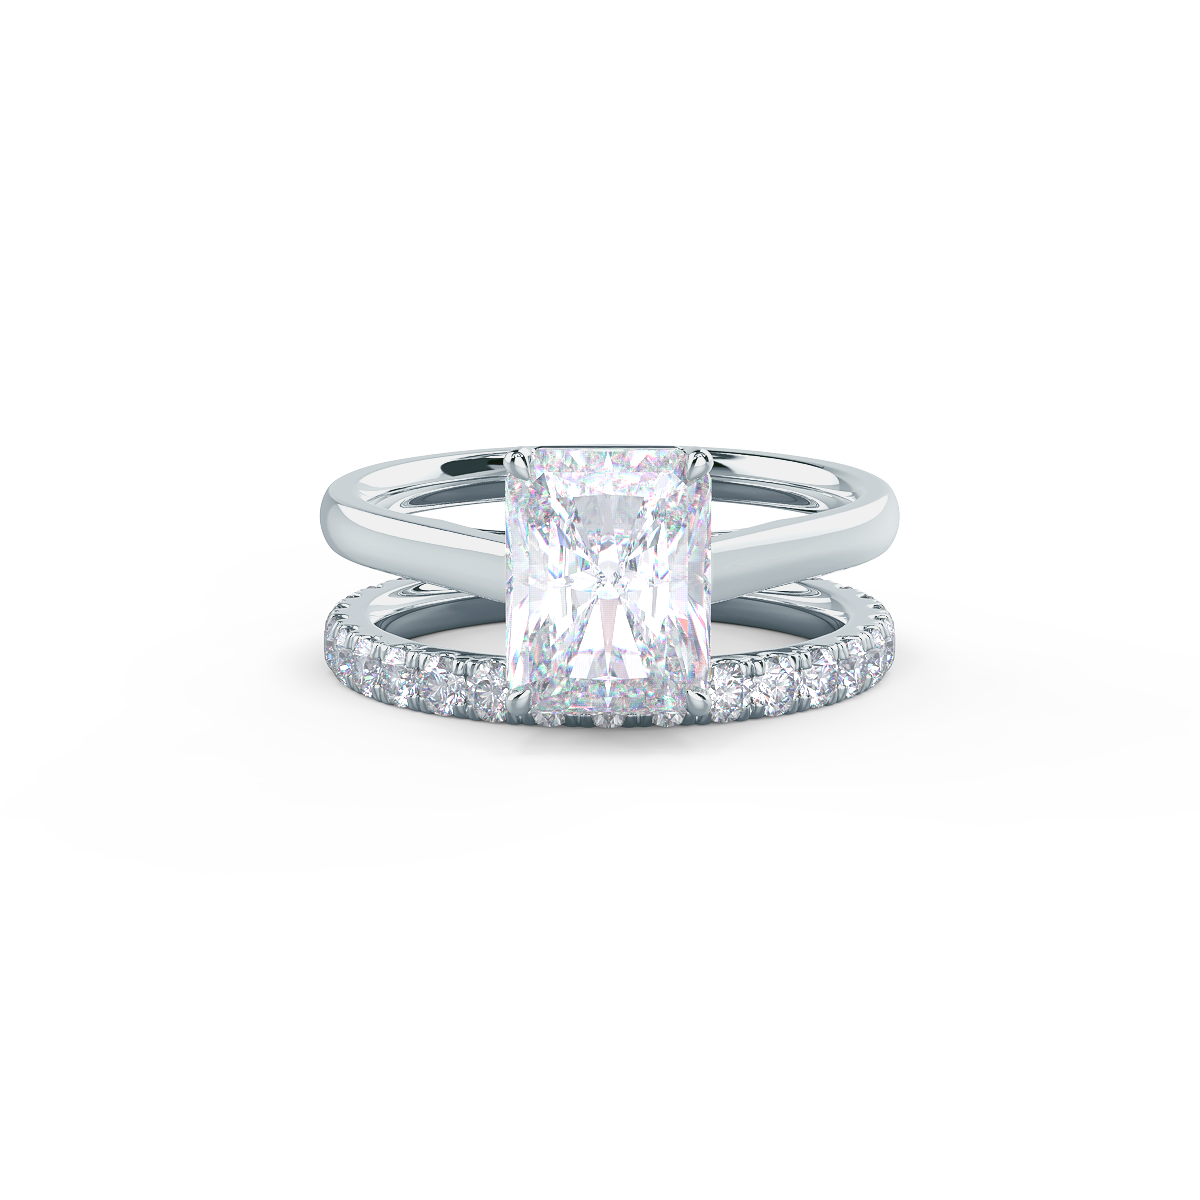  This setting pairs with a wide variety of wedding band styles.    Shop All Wedding Bands   